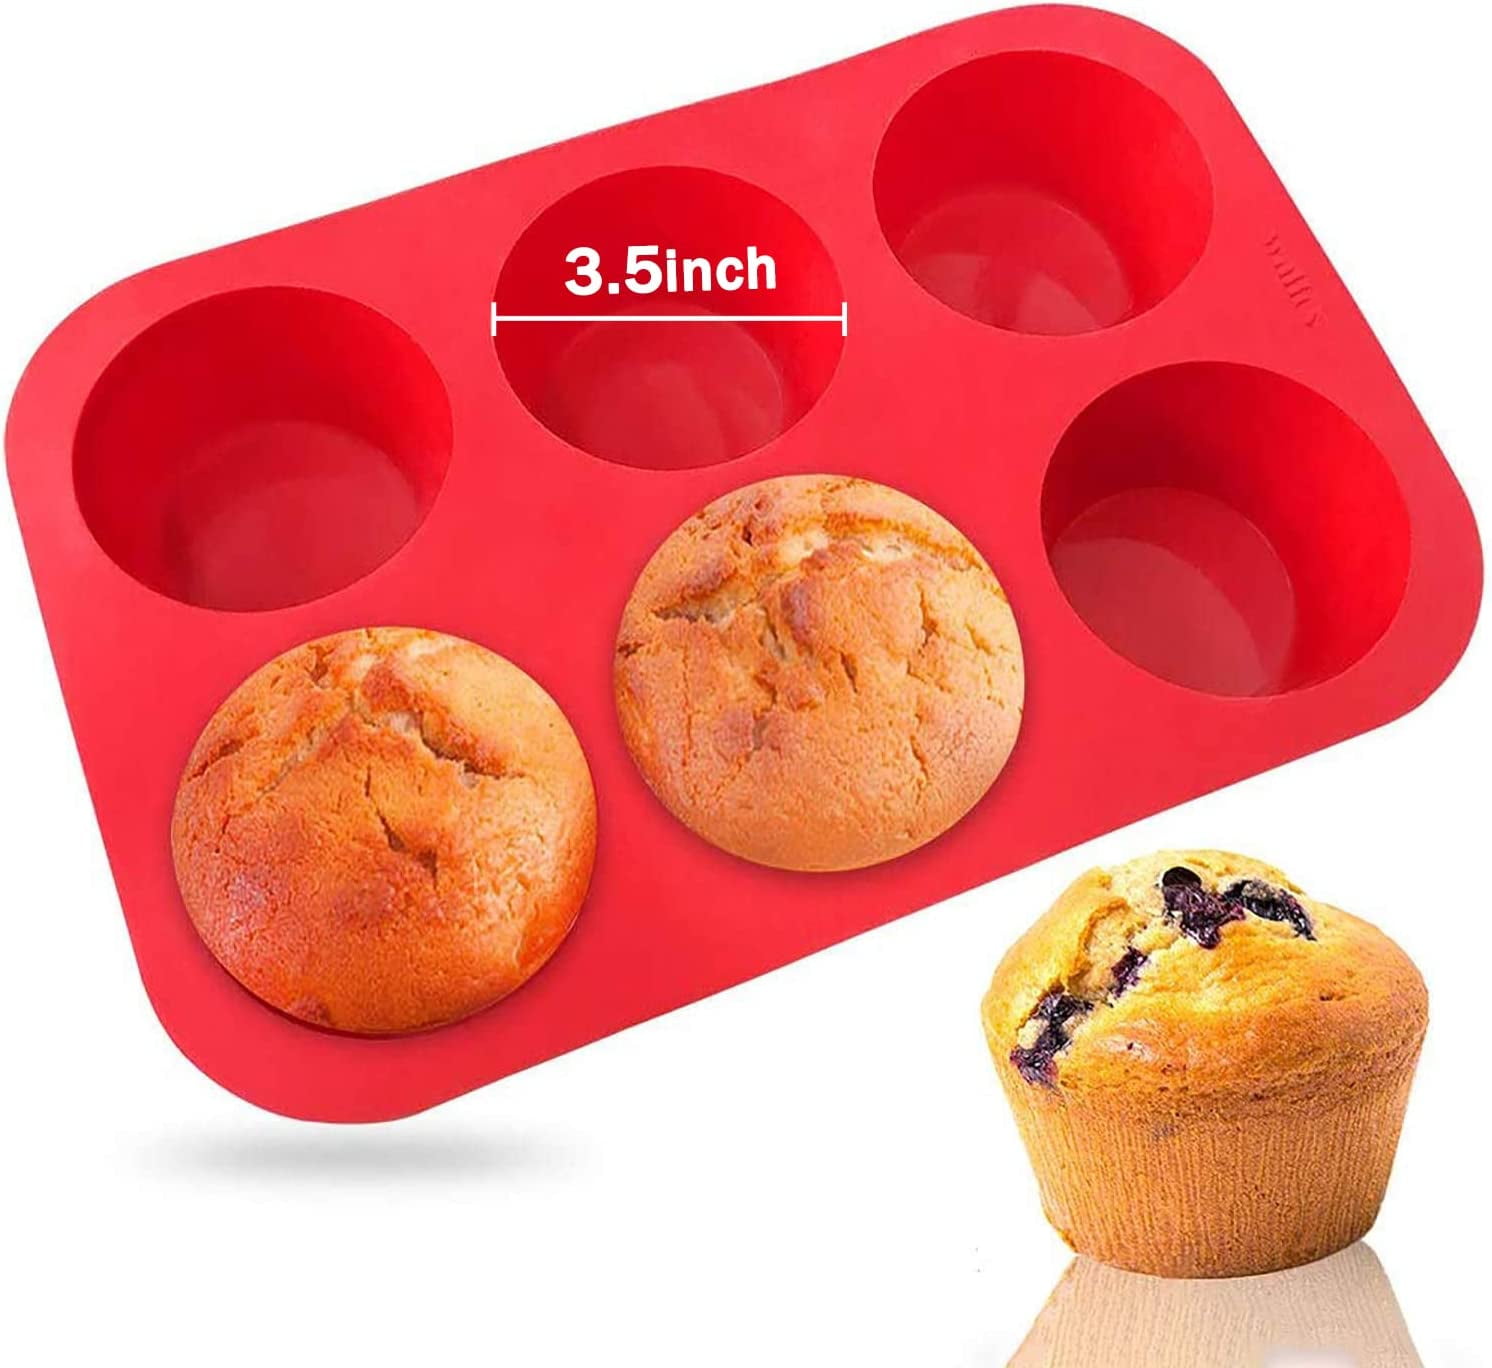 Bake Boss Silicone Muffin Pan with Handles, 6 Cups Jumbo Cupcake Pan, Silicone Muffin Cups for Baking, Eggs & Cupcakes, Non-Stick Silicone Cupcake